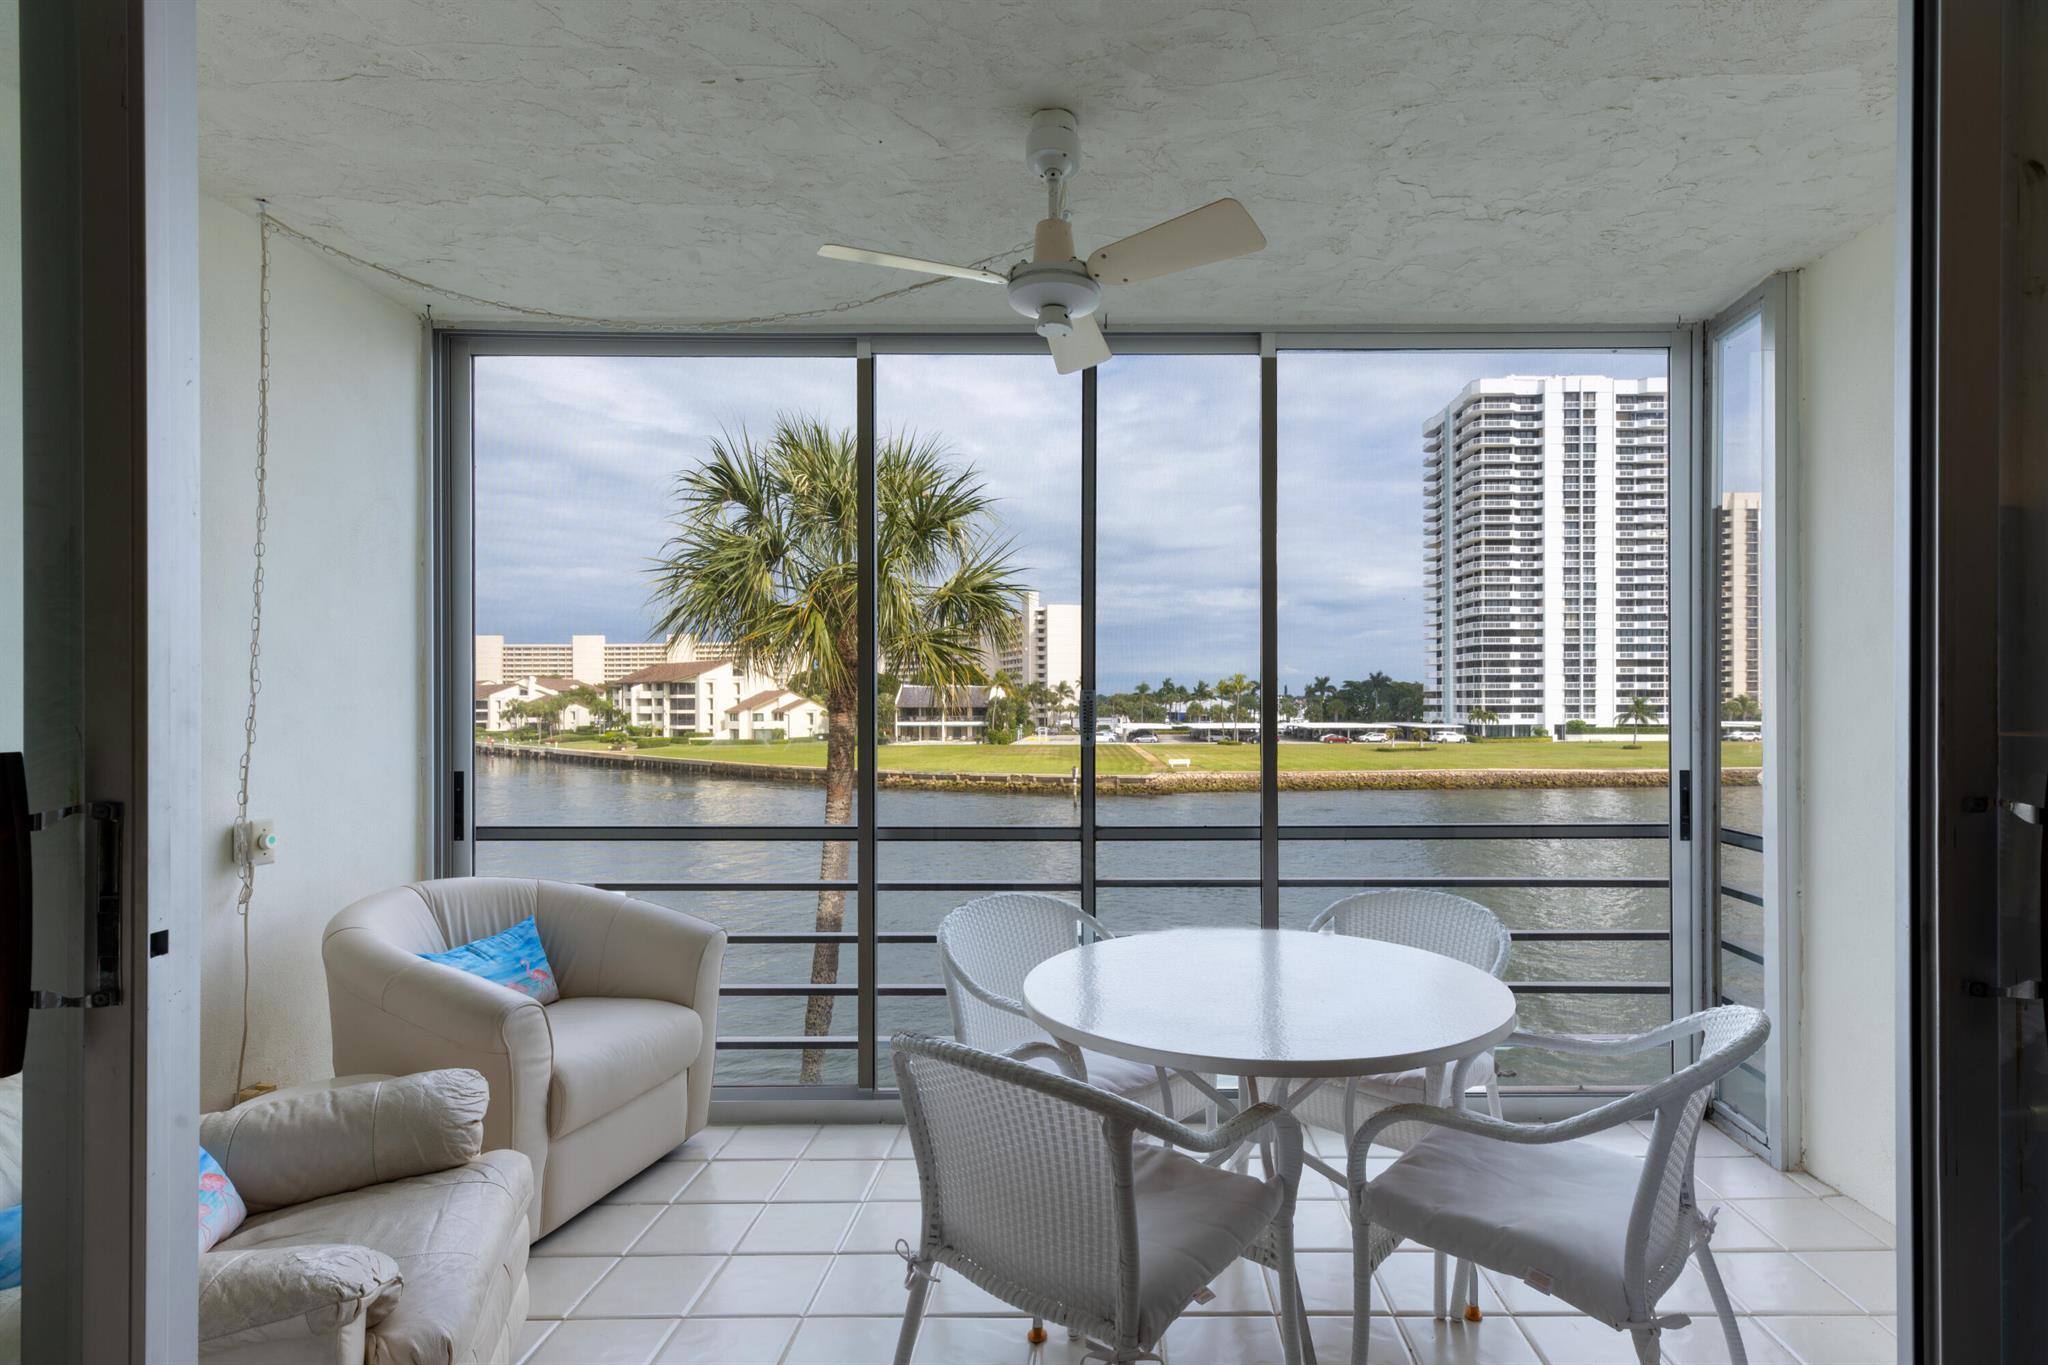 Stunning intracoastal and lake views from this 3rd floor condo in Ports O'Call. Desirable split floor plan features a foyer, an expansive, light filled living space, 2 large bedrooms and 2 full bathrooms. Sit back and enjoy watching boats glide by from your balcony with additional sliders to protect you and your furnishings. Well maintained with new a/c and a new building roof (2022). Assigned covered parking space just steps from the lobby. Fantastic opportunity. Come make this condo your own! Active 55+ community featuring clubhouse, heated pool, gym, private storage closet and day use dock. Direct ocean access, docks for annual rent by waitlist. Walk to the NPB Country Club and Safe Harbor Marina. Close to shopping, restaurants and beaches. 20 minutes to PBI.